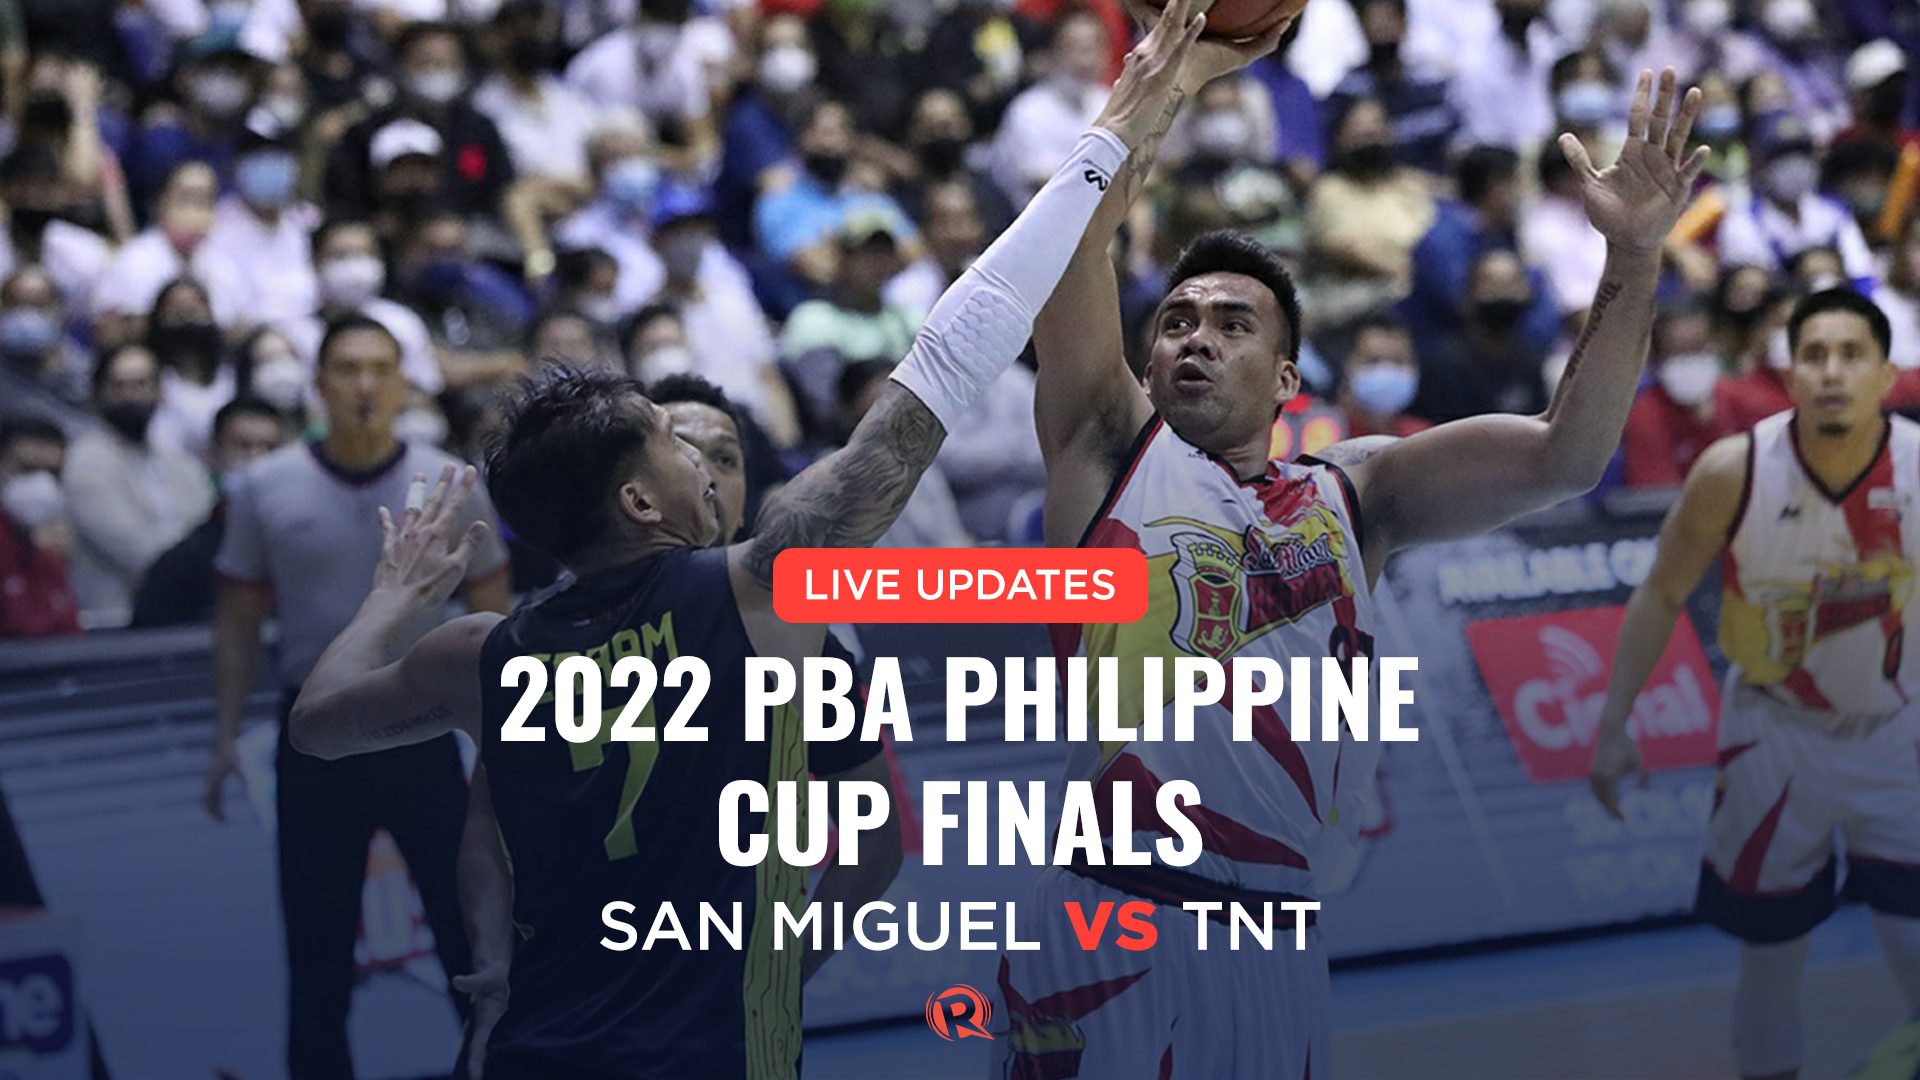 HIGHLIGHTS: San Miguel vs TNT, Game 3 – PBA Philippine Cup finals 2022